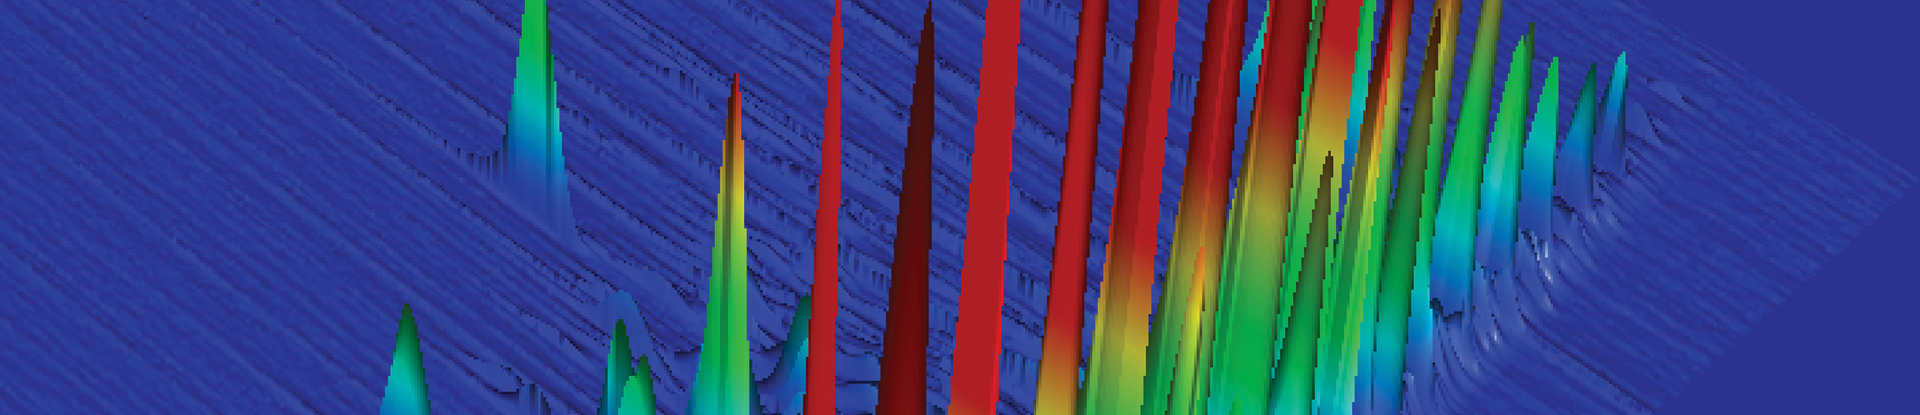 Multiple colors showing gas chromatography time of flight mass spectrometry data